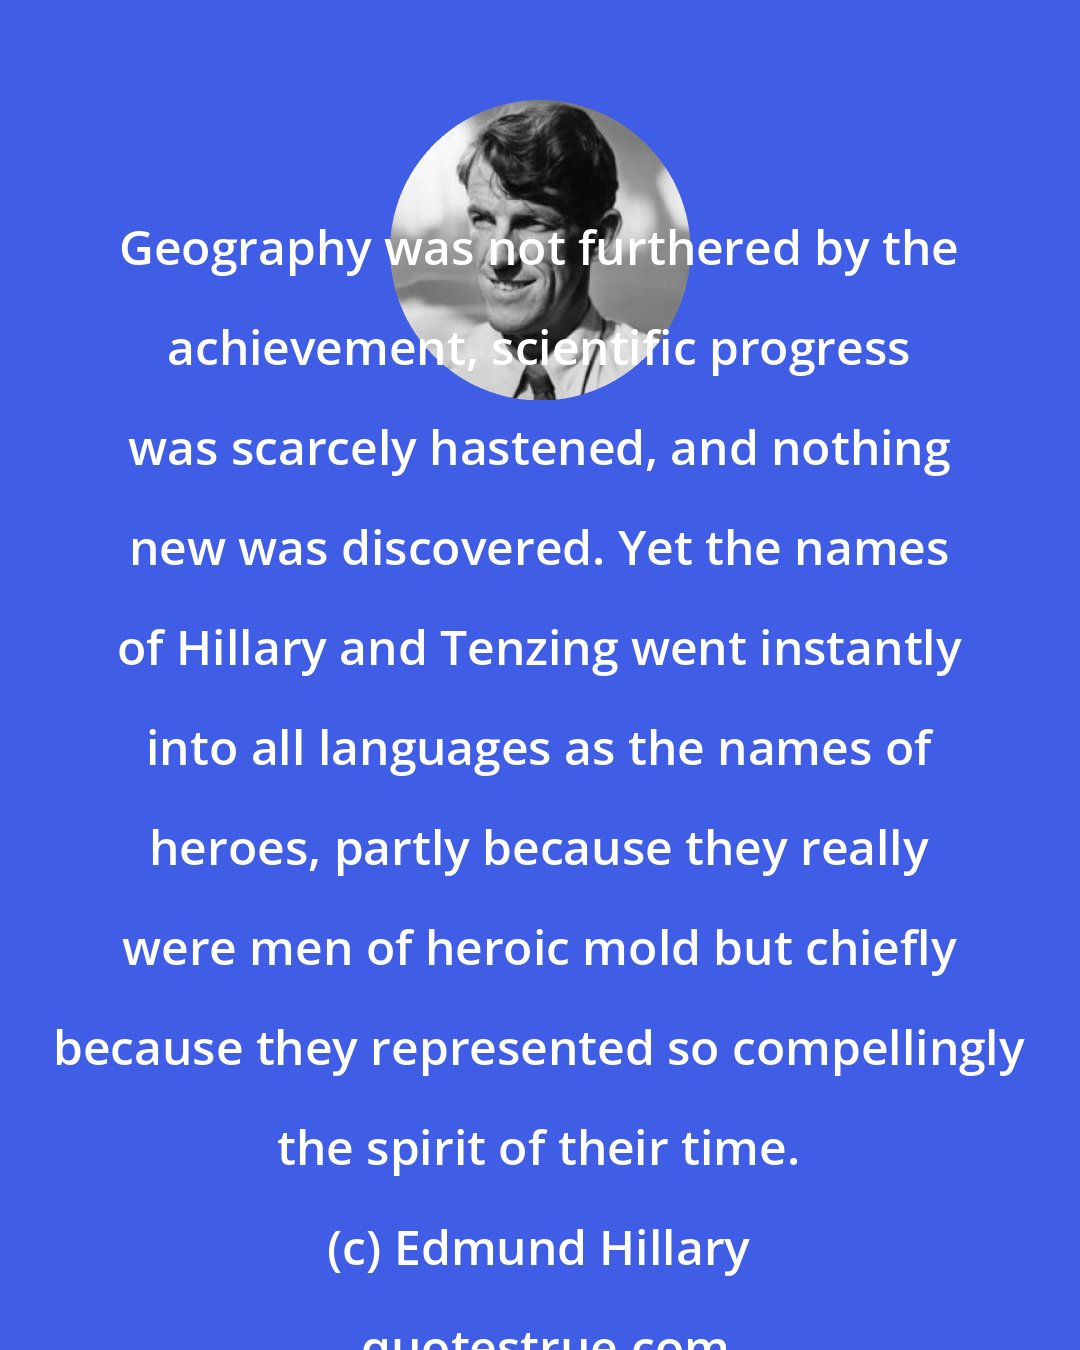 Edmund Hillary: Geography was not furthered by the achievement, scientific progress was scarcely hastened, and nothing new was discovered. Yet the names of Hillary and Tenzing went instantly into all languages as the names of heroes, partly because they really were men of heroic mold but chiefly because they represented so compellingly the spirit of their time.